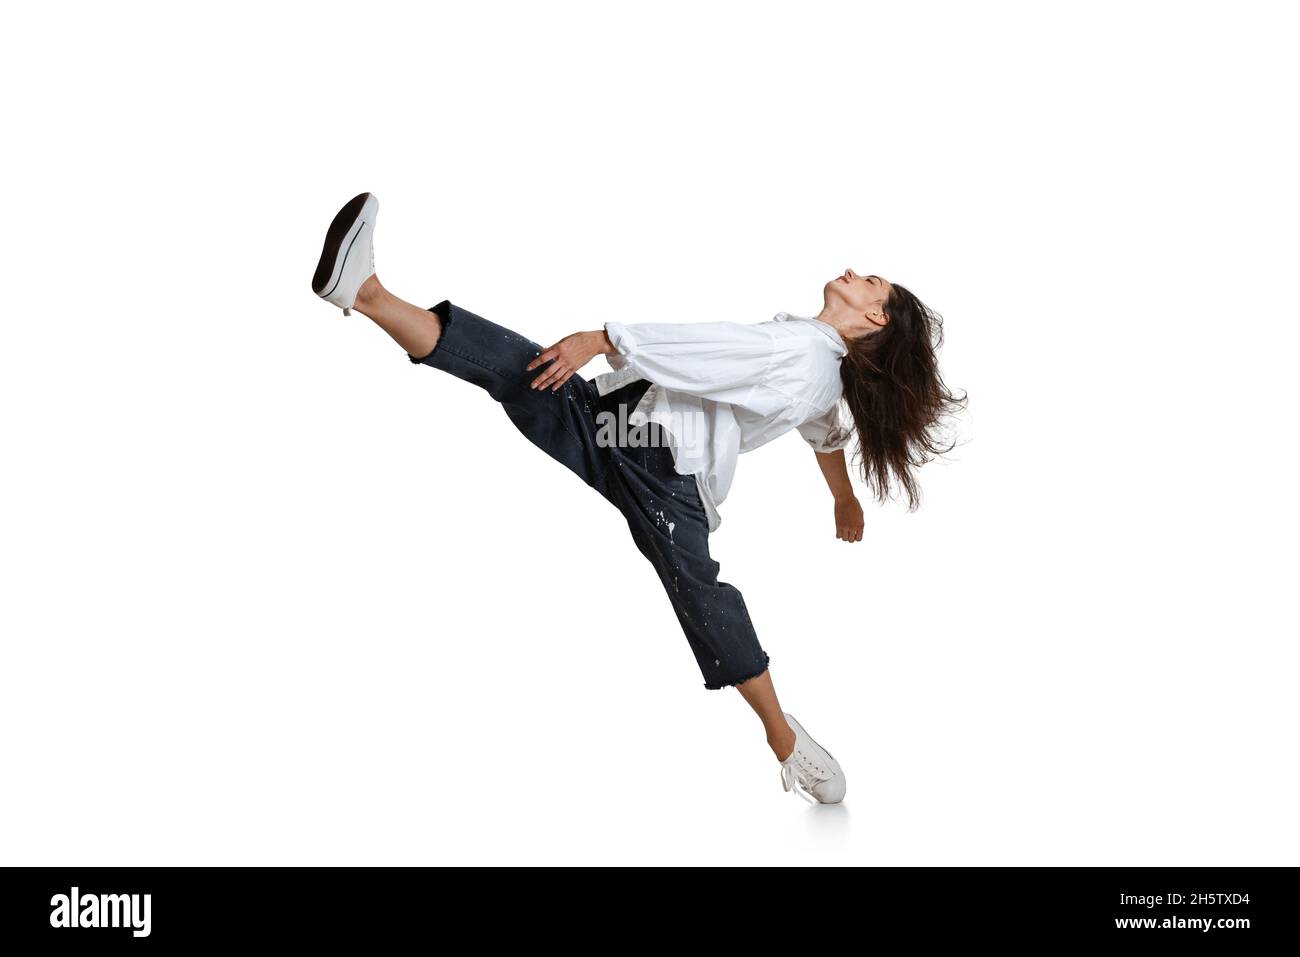 Young woman in casual wear moves dynamically isolated on white background. Art, motion, action, flexibility, inspiration concept. Stock Photo